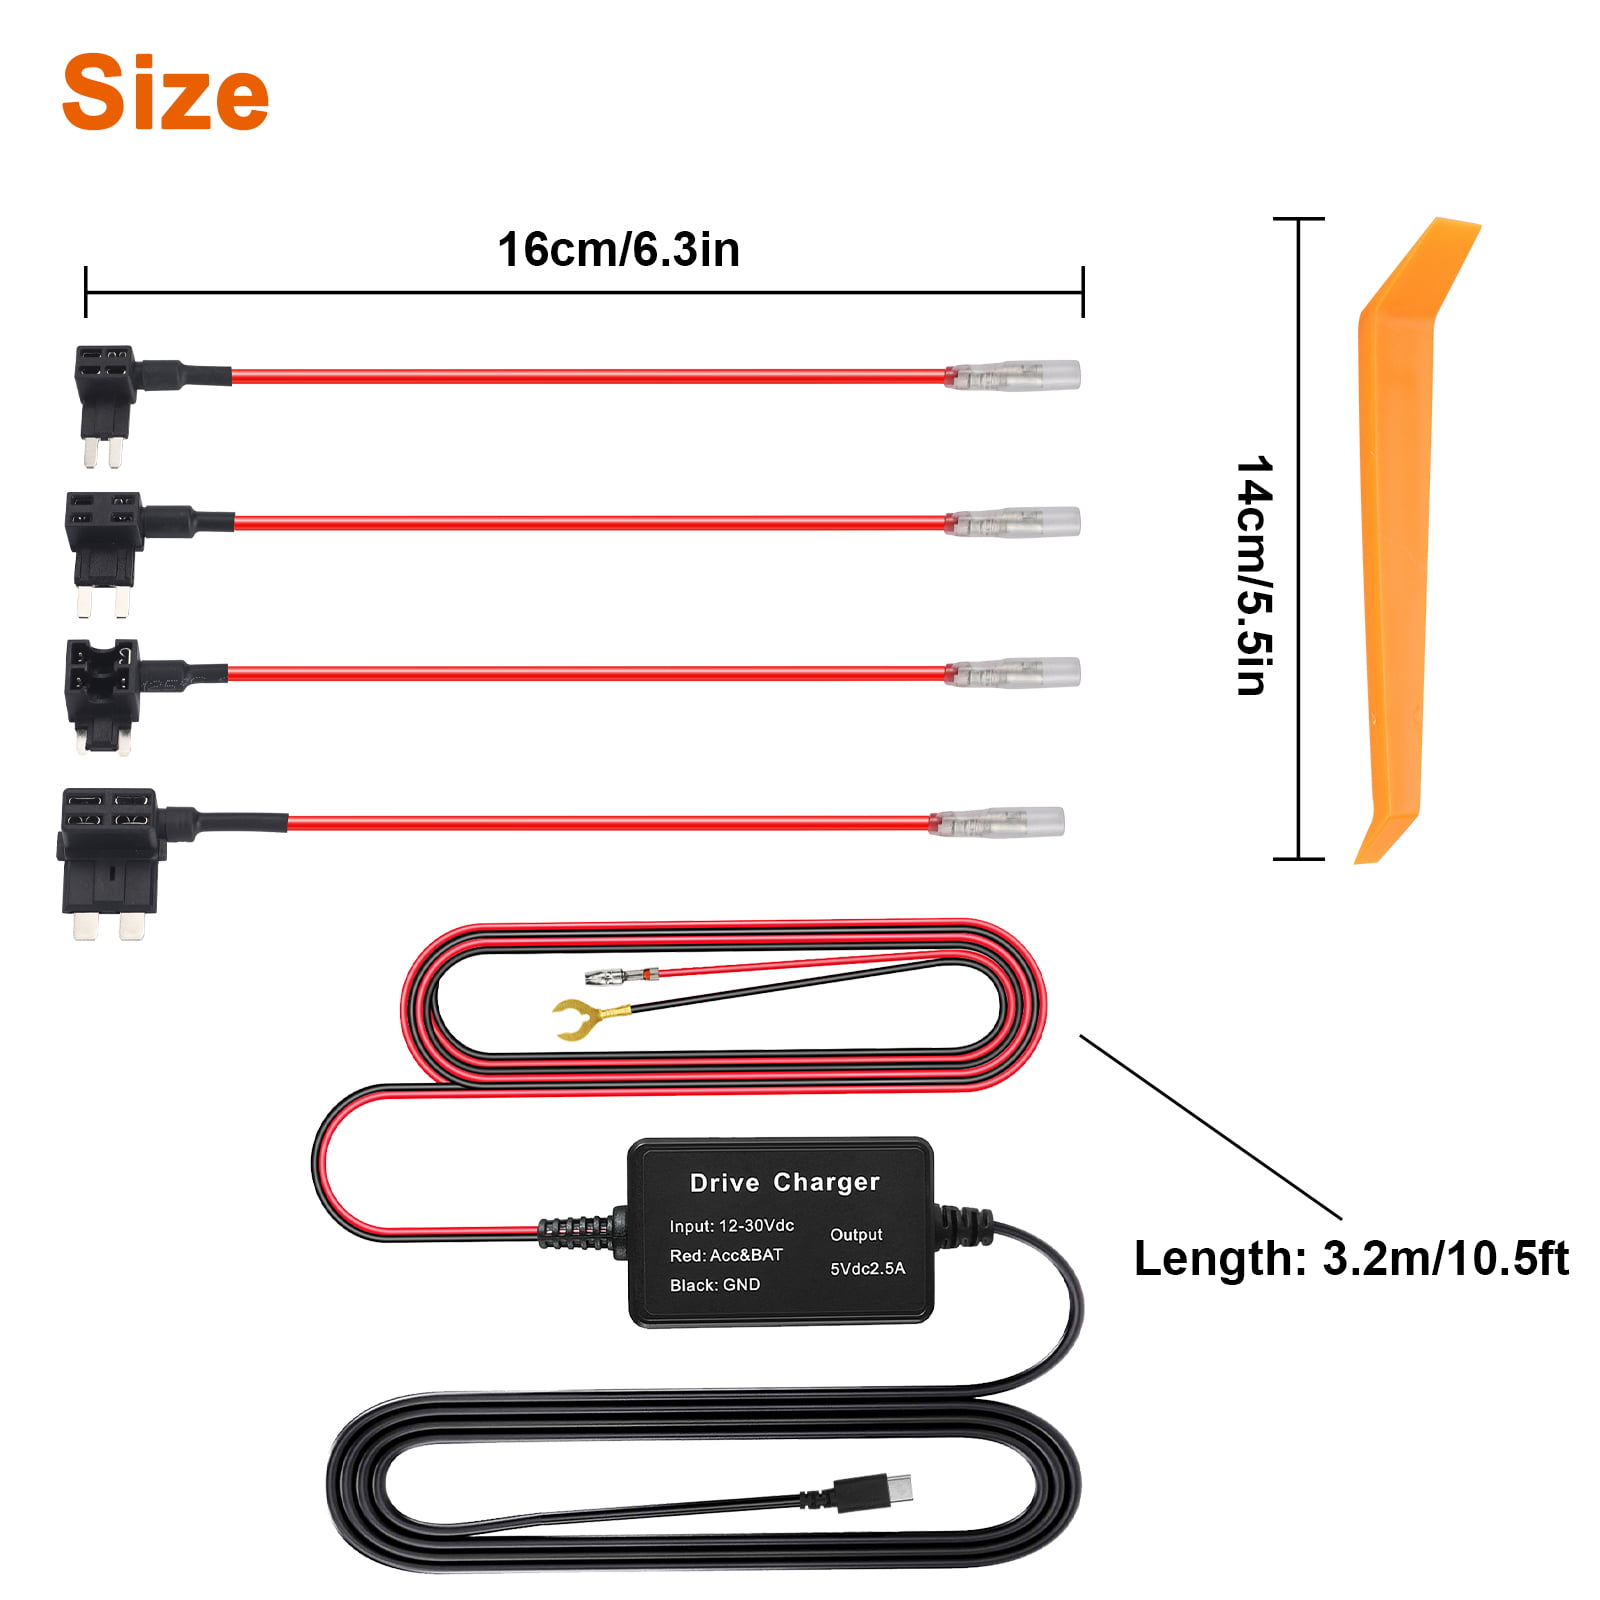 Hardwire Kit for Dash Camera USB C Port, Type C Dash Cam Hardwire Kit  Converts 12V-24V to 5V/3A Car Dashcam Charger Cable Kit, Low Voltage  Protection